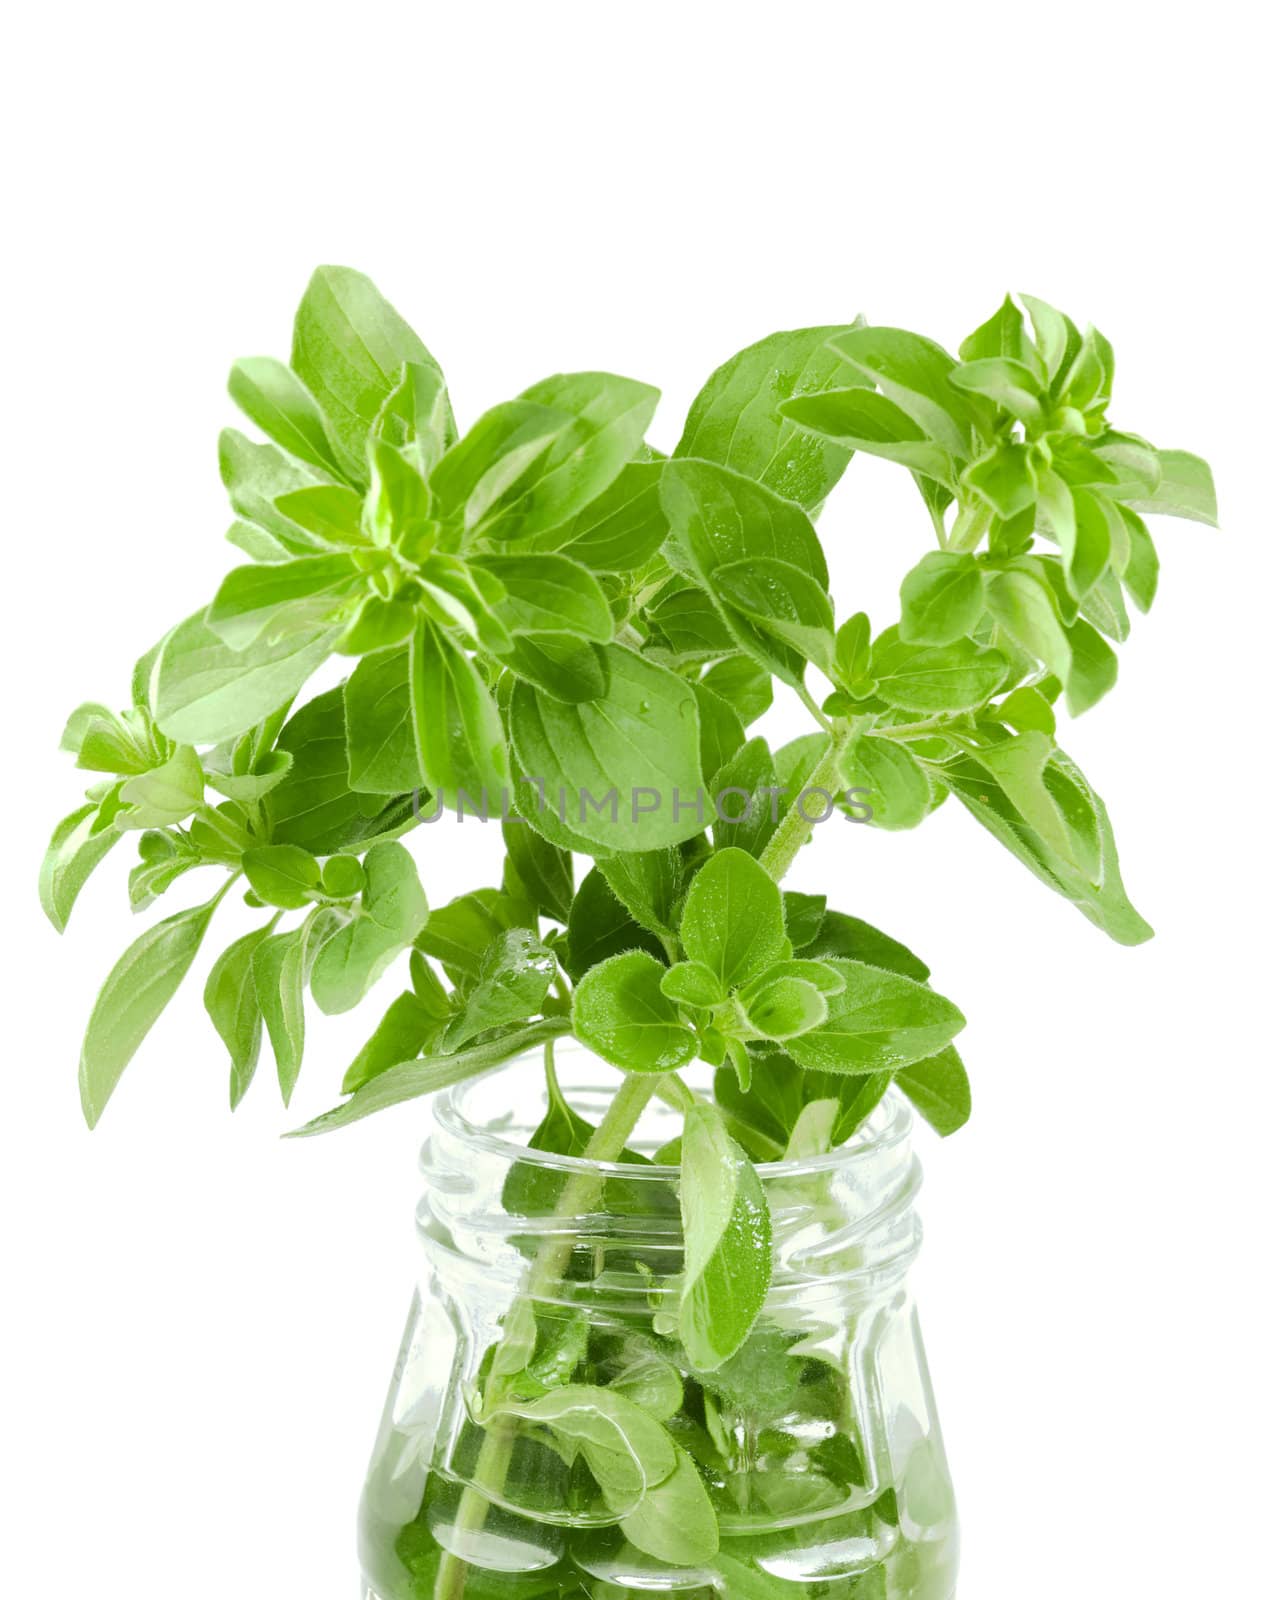 fresh organic herbs basil sprig in a glass jar isolated on white background